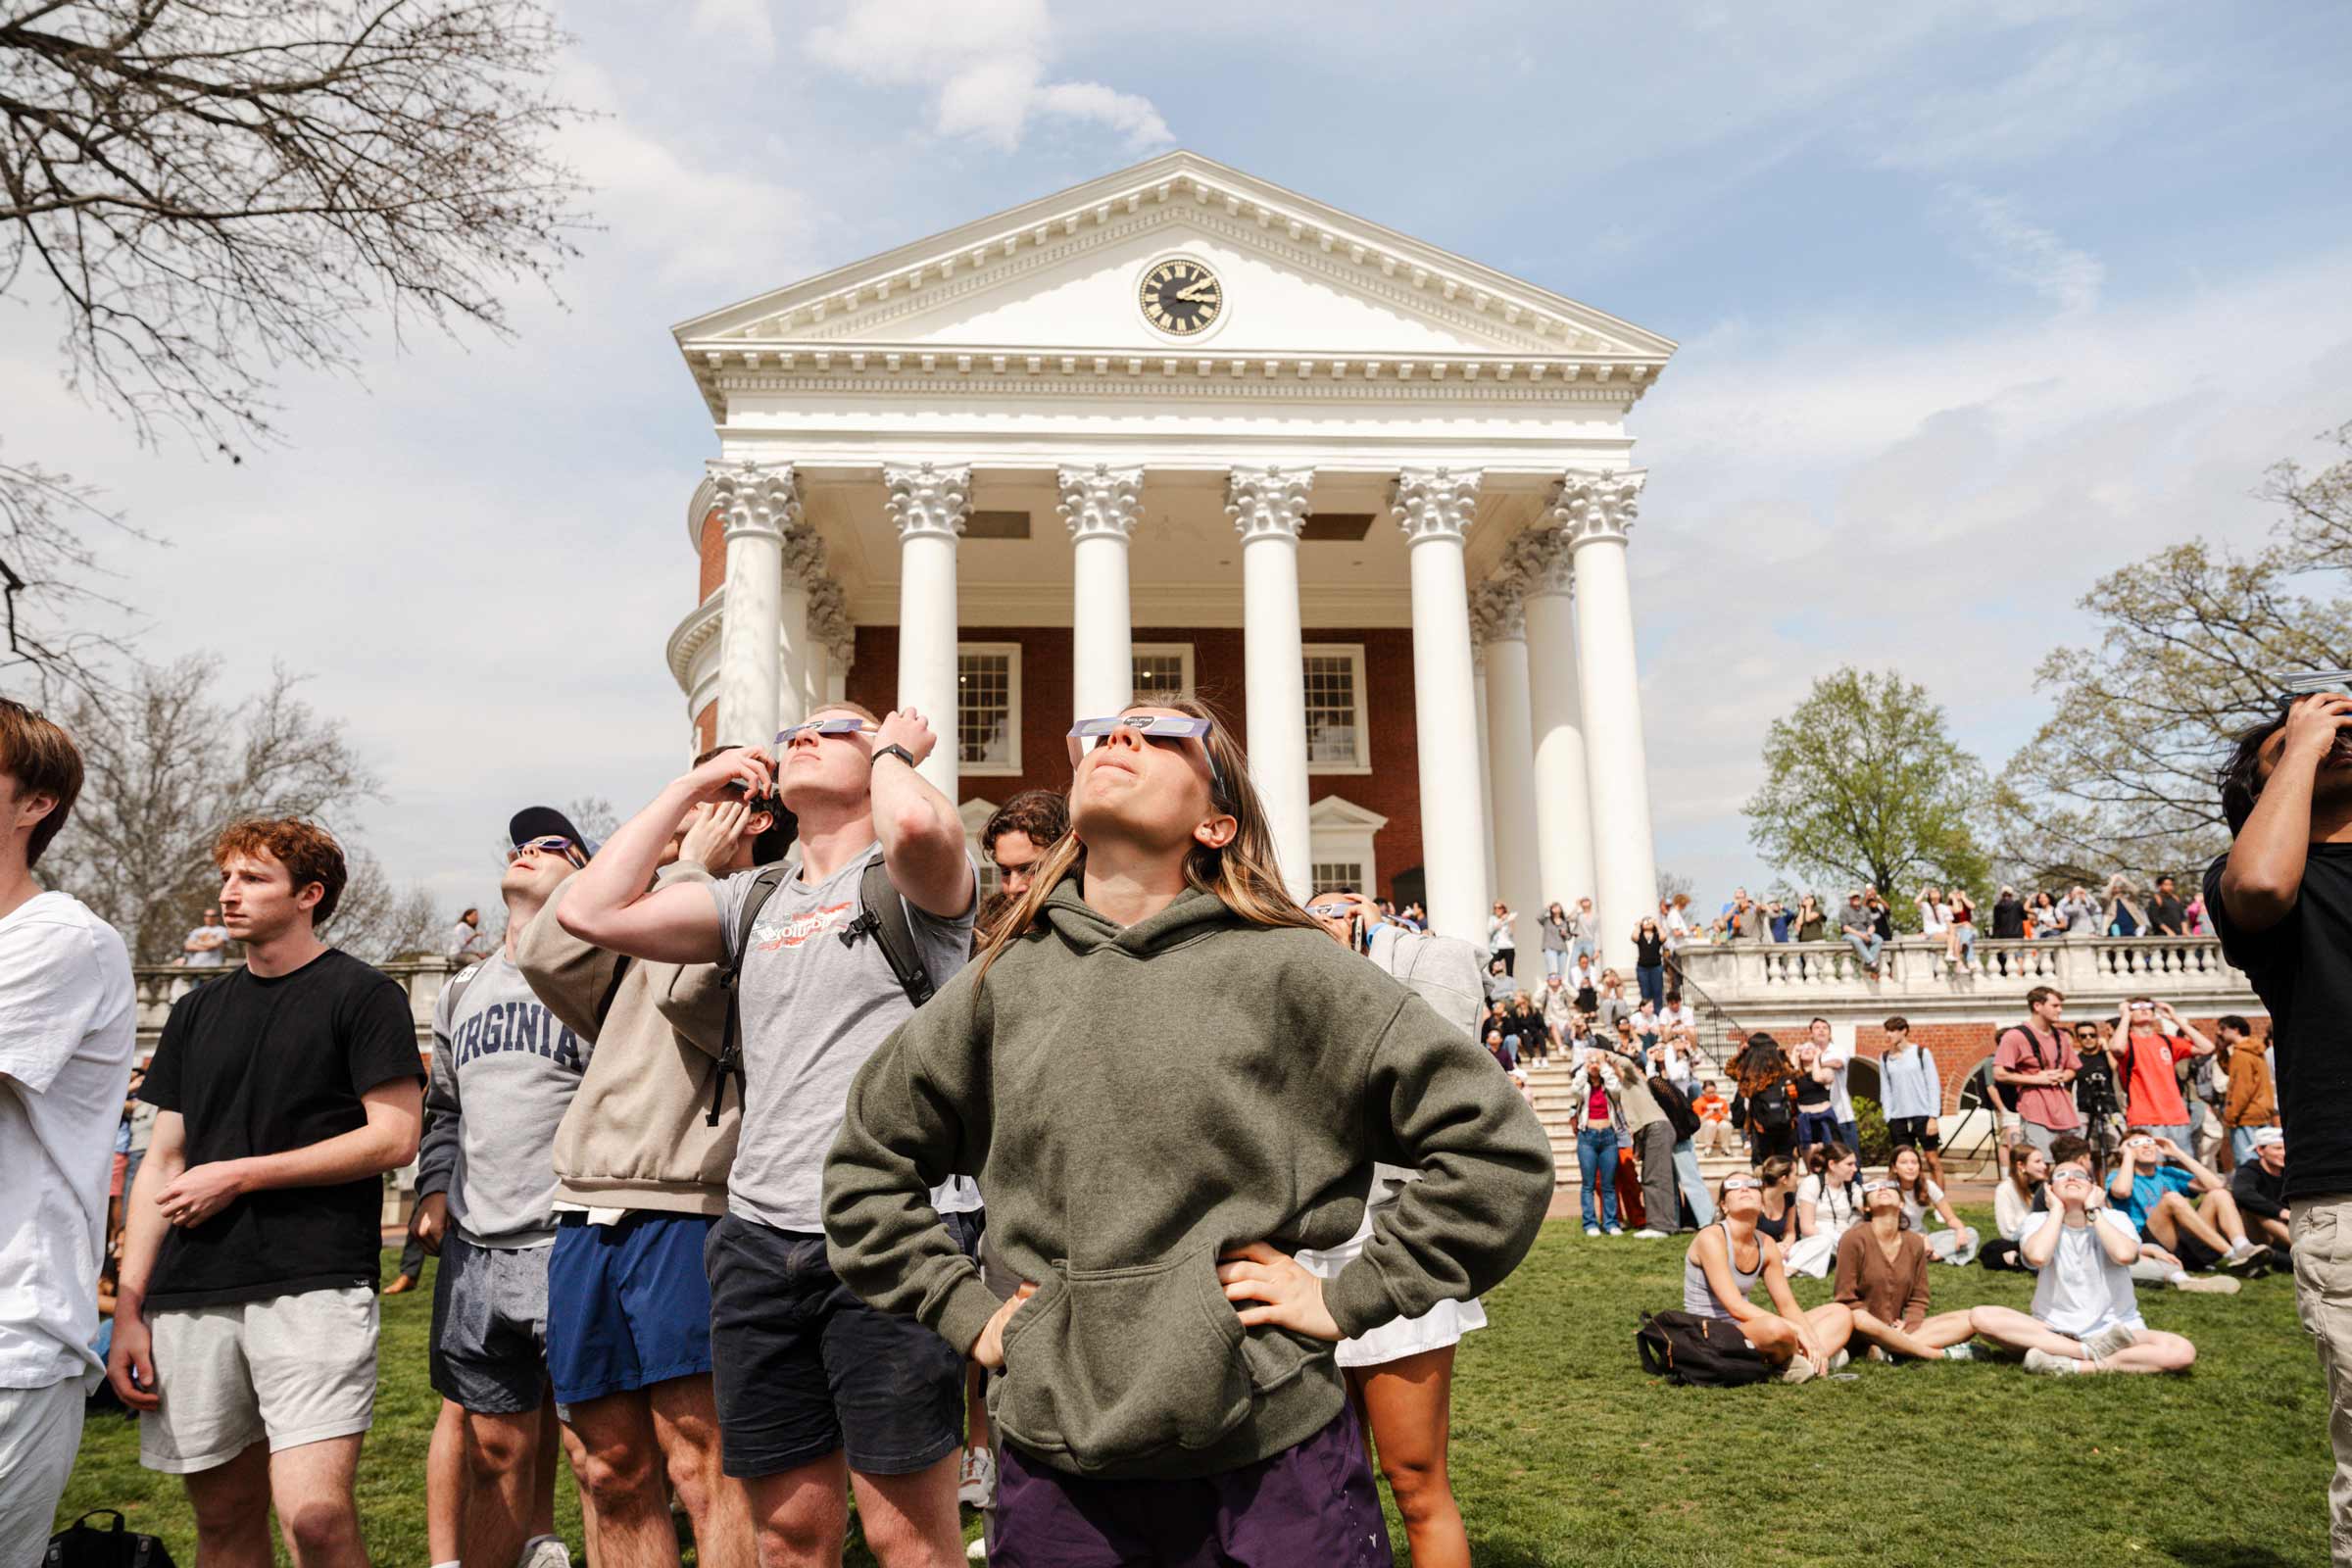 A group looks at Eclipse in front of Rotunda